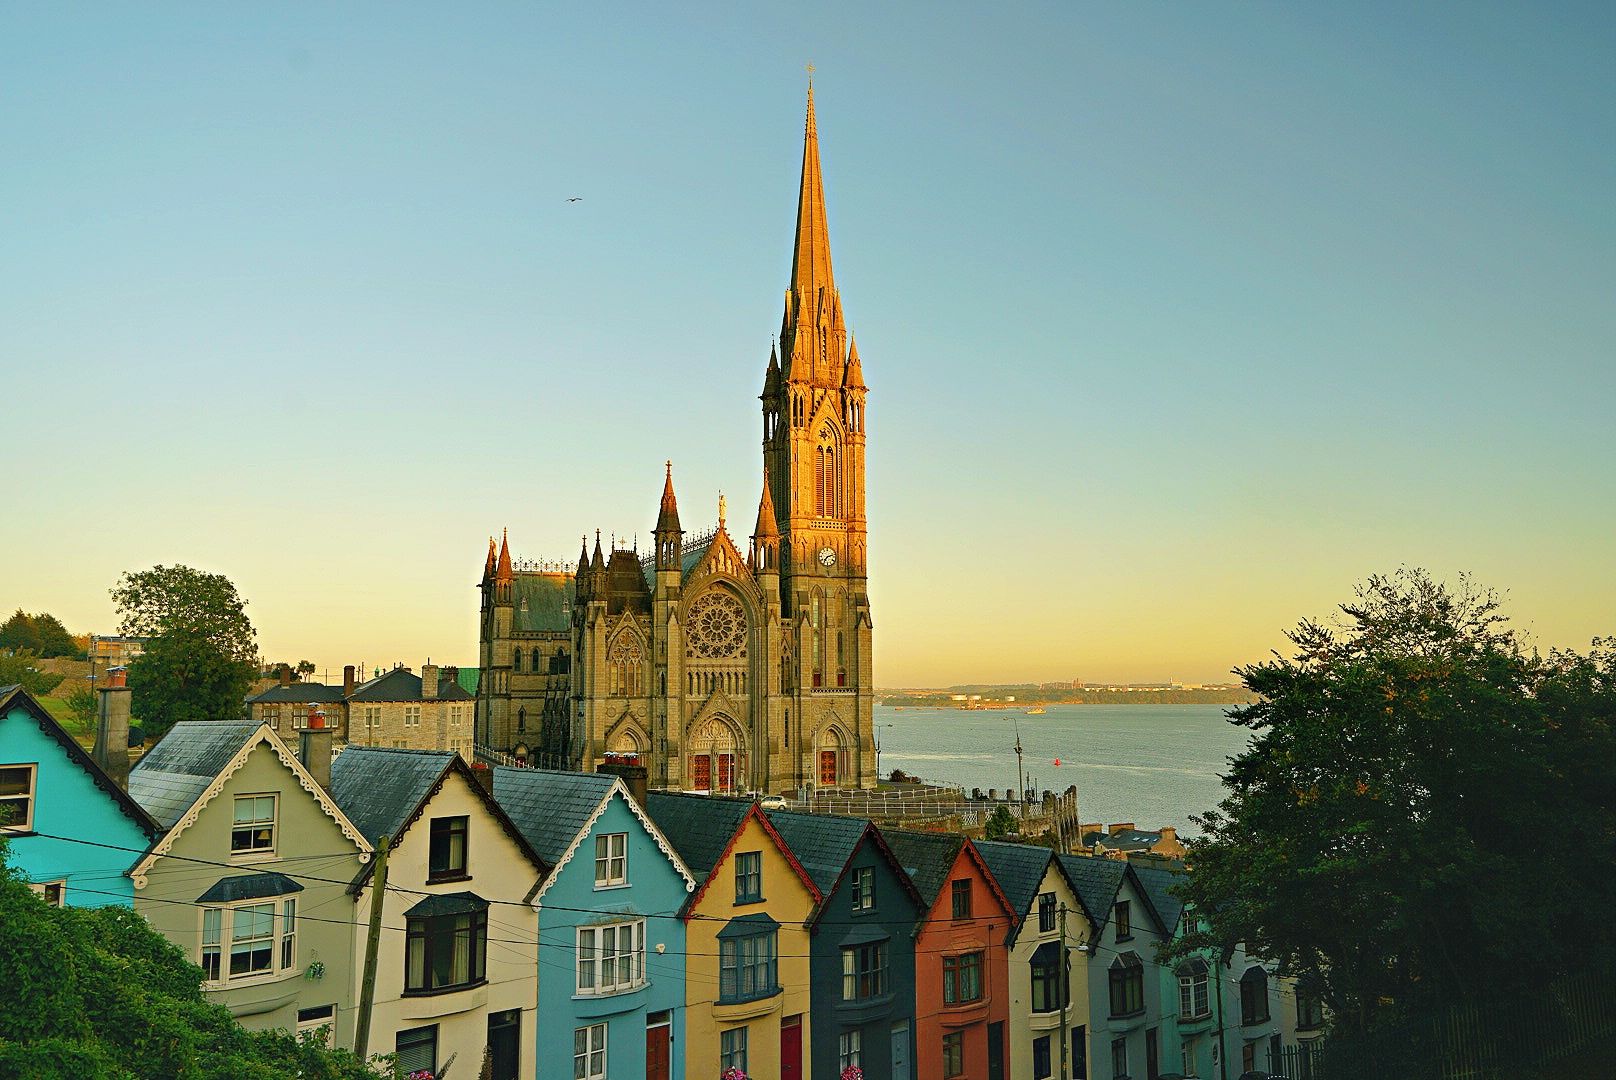 Cork is the second largest city in the Republic of